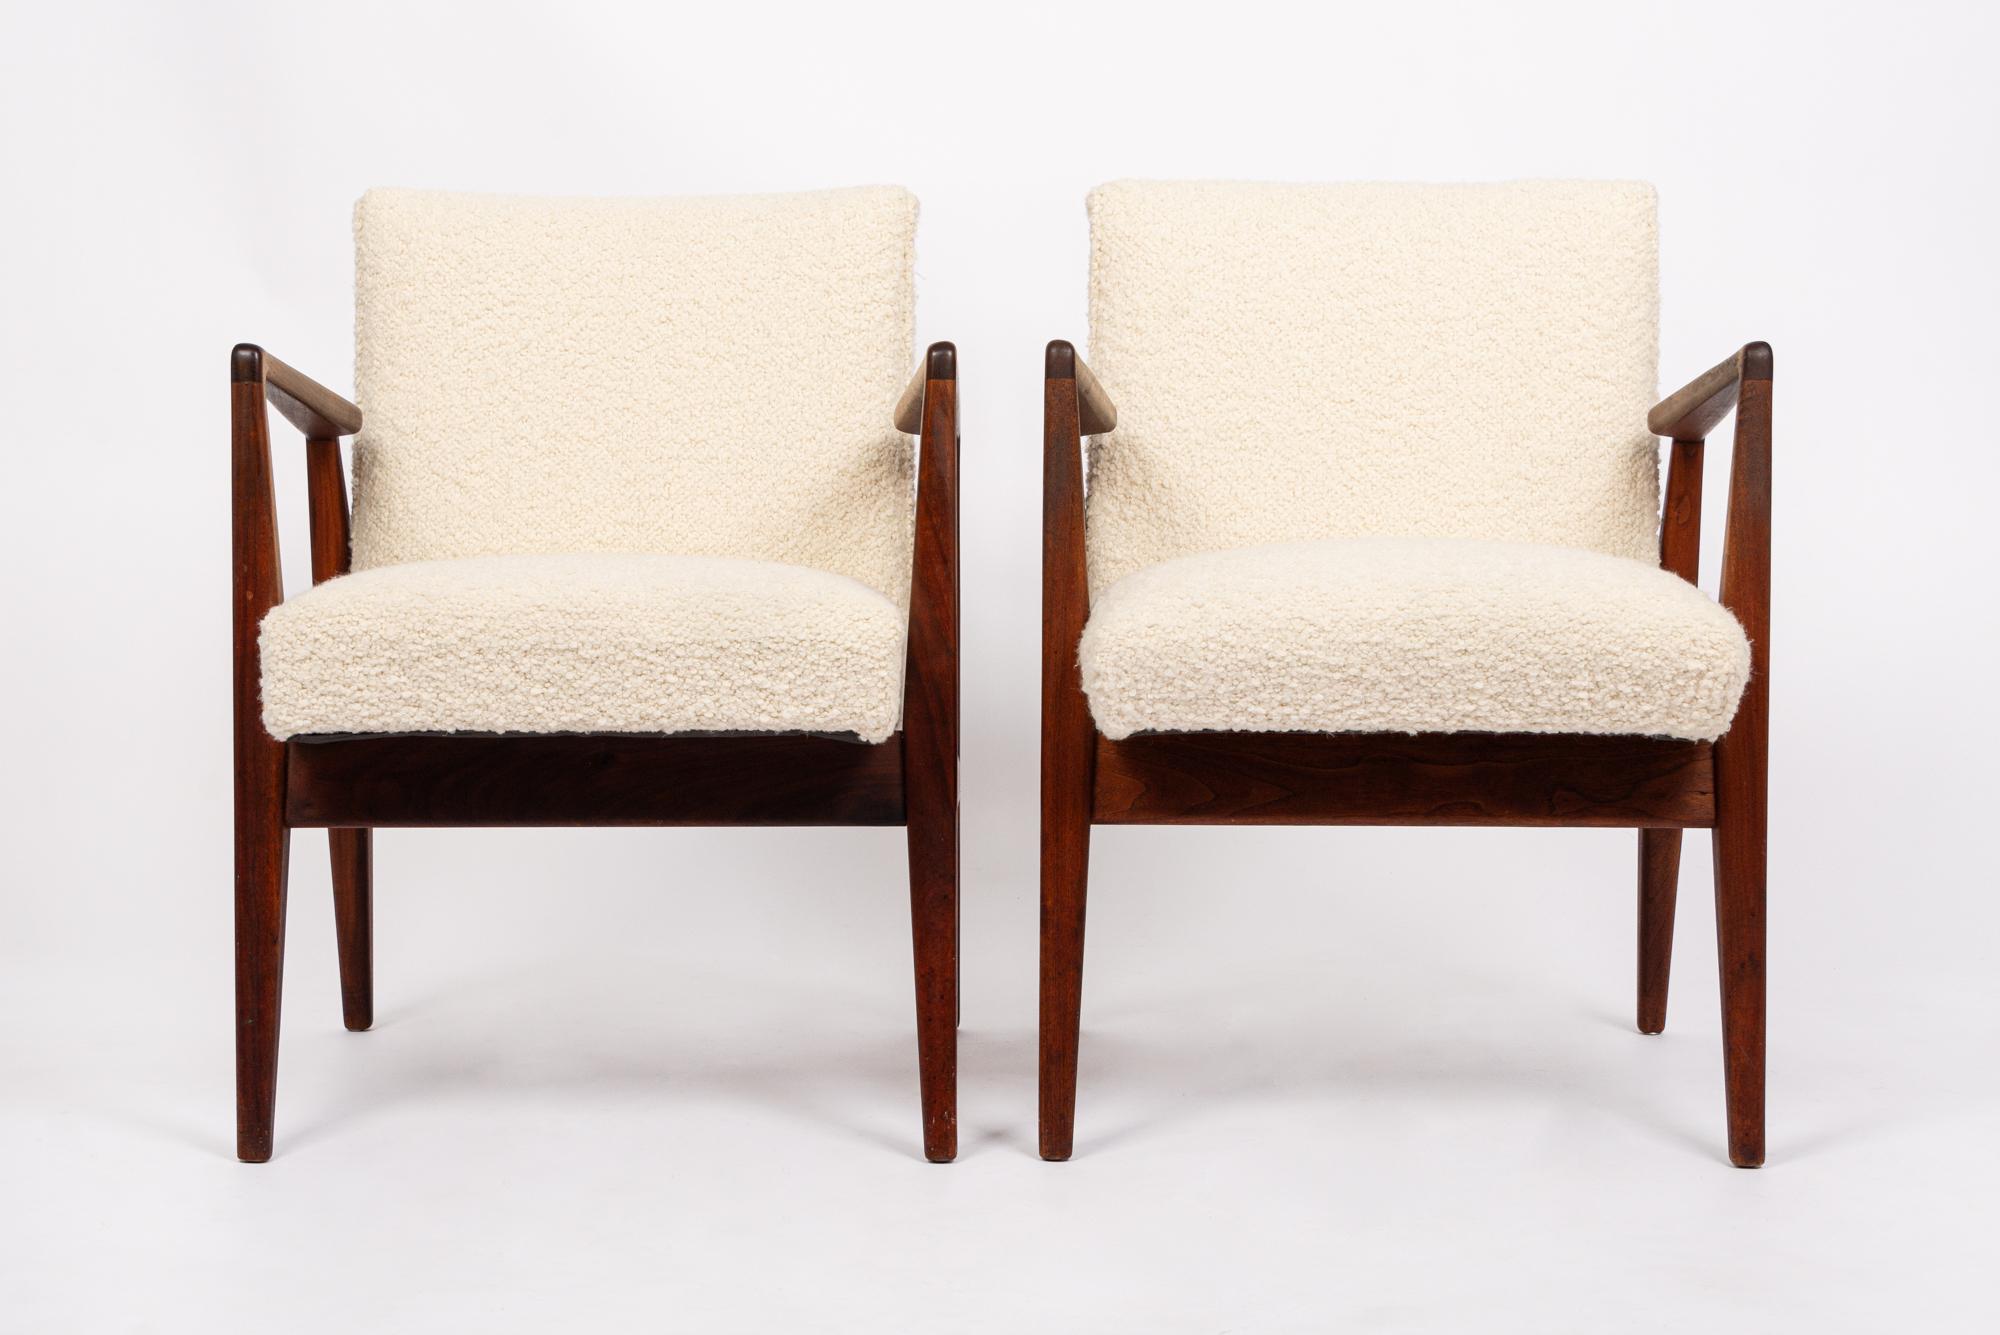 This pair of vintage mid century modern lounge chairs were designed by Jens Risom circa 1960. The classic Danish modern design has clean, minimalist lines and a striking sculptural profile. The lounge chairs feature well-built, solid walnut wood